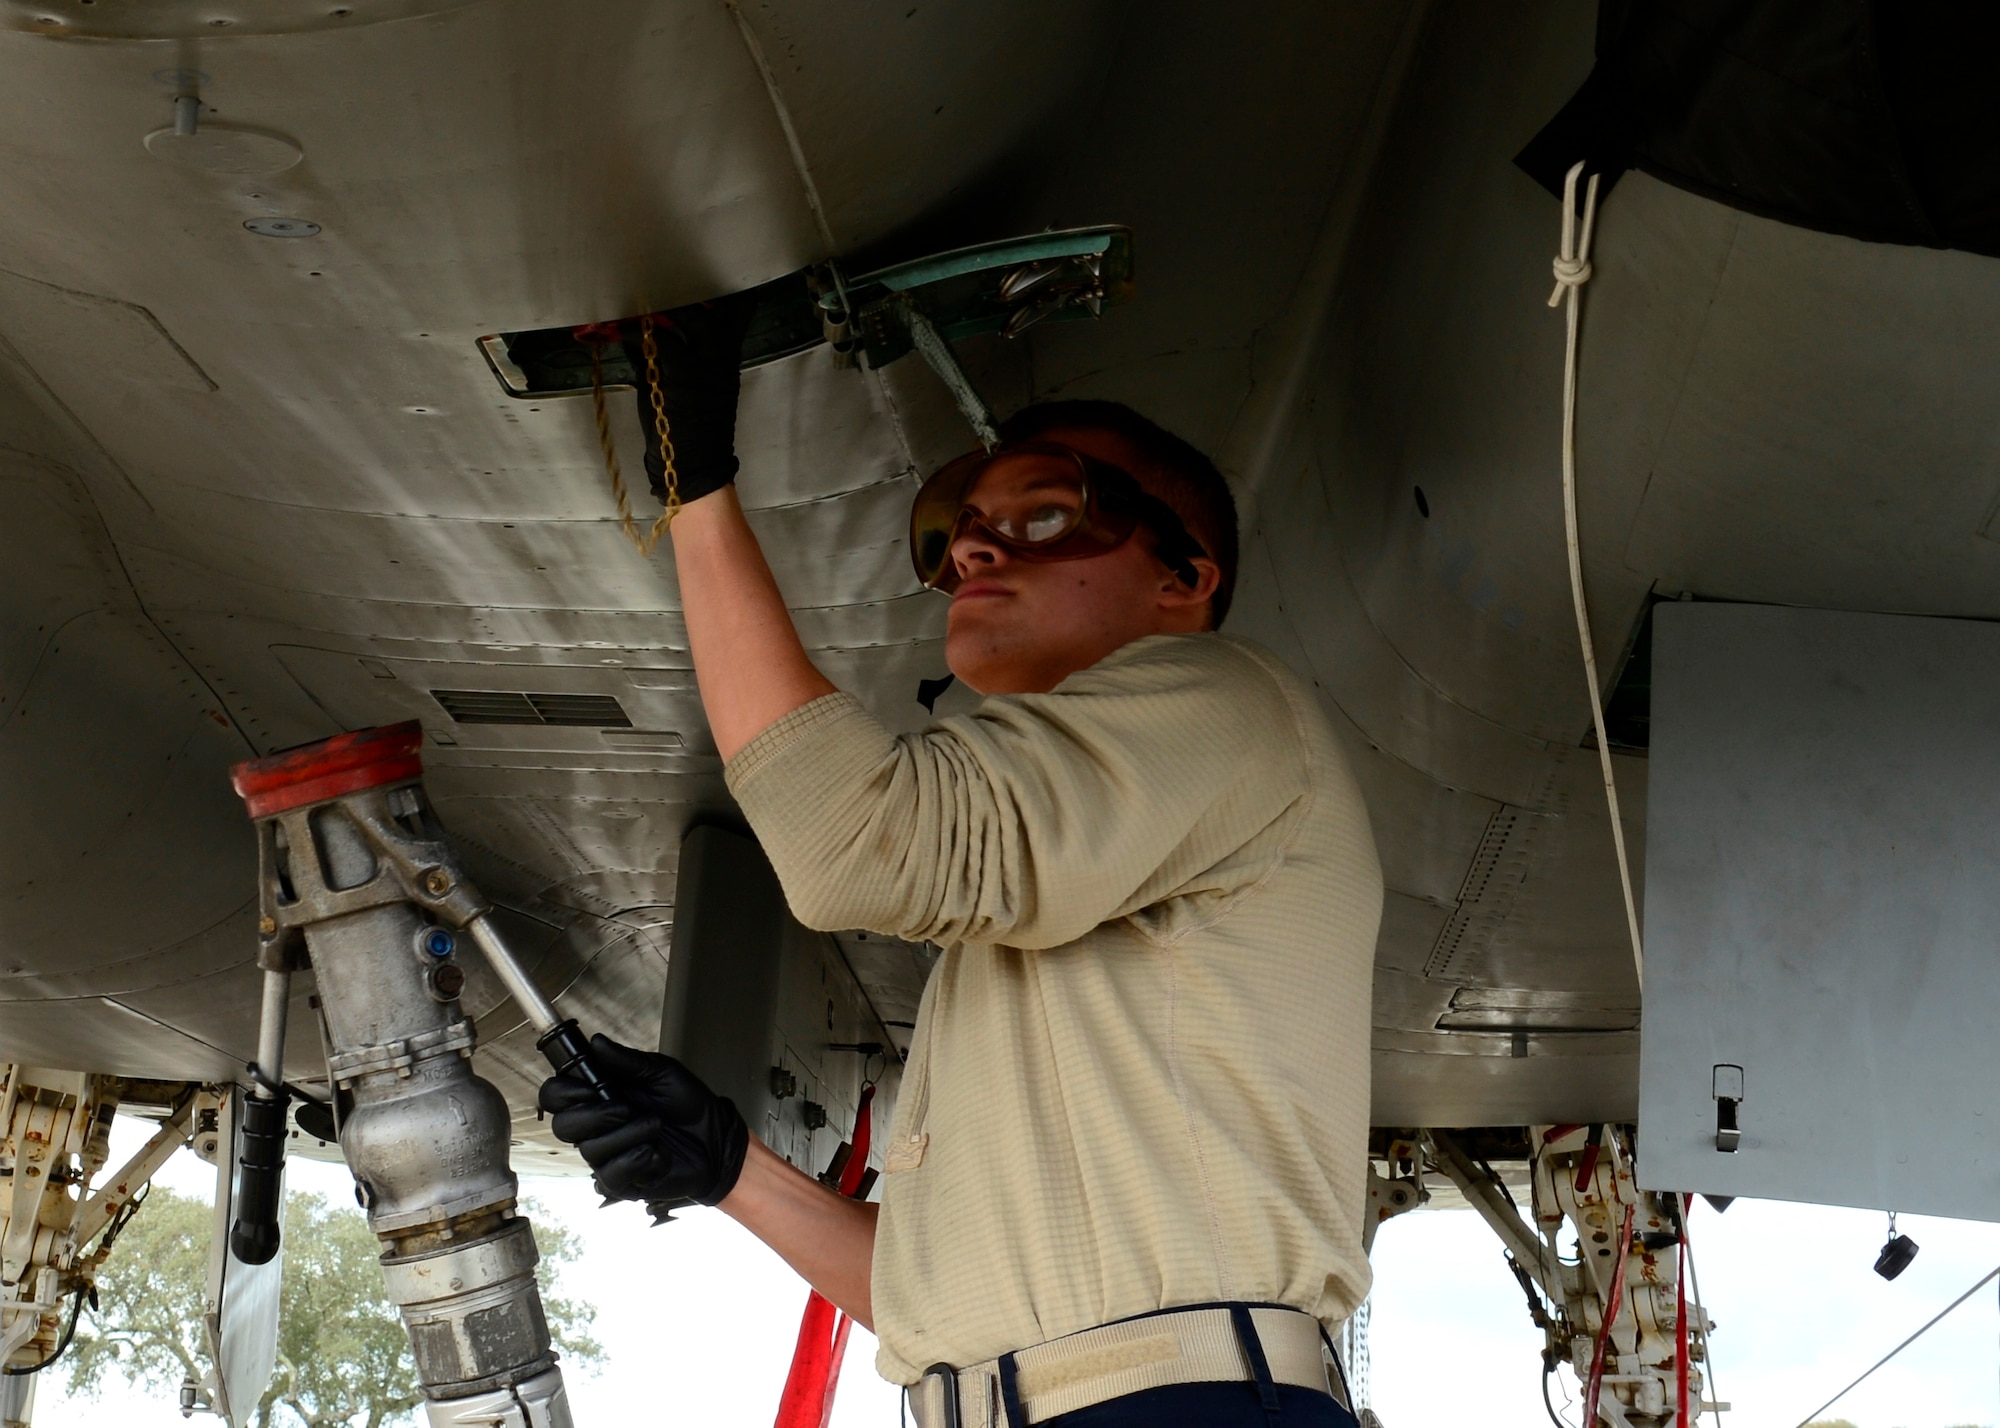 Senior Airman Tristan Gains, 493rd Aircraft Maintenance Unit crew chief prepares to refuel an F-15C Eagle after a flight during exercise Real Thaw at Beja Air Base, Portugal, Feb. 25, 2016. Real Thaw was designed to provide joint interoperability training throughout the execution of a vast range of battlefield missions, facing day and night operations in a high intensity joint setting. (U.S. Air Force photo by Senior Airman Dawn M. Weber/Released)